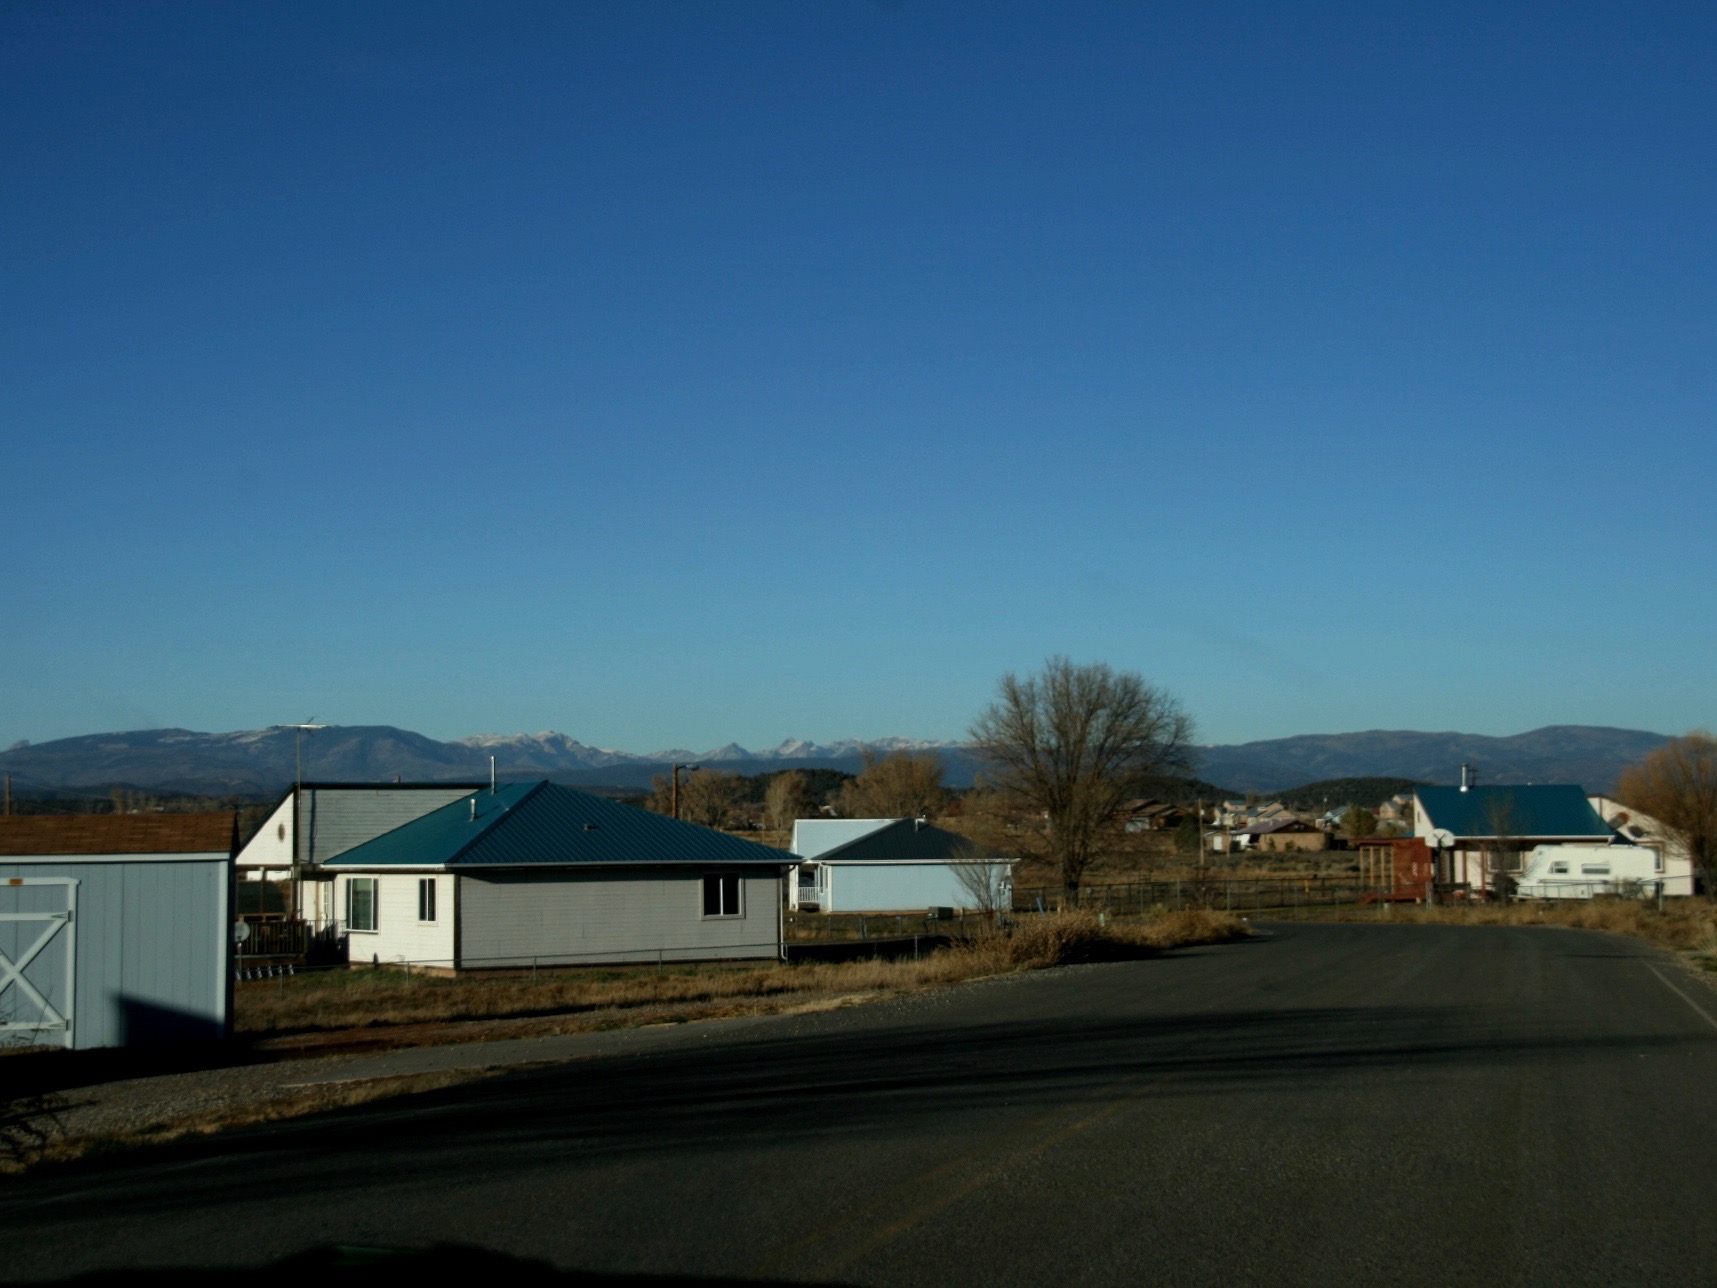 Southern Ute Tribe pressured to share more of $126M settlement